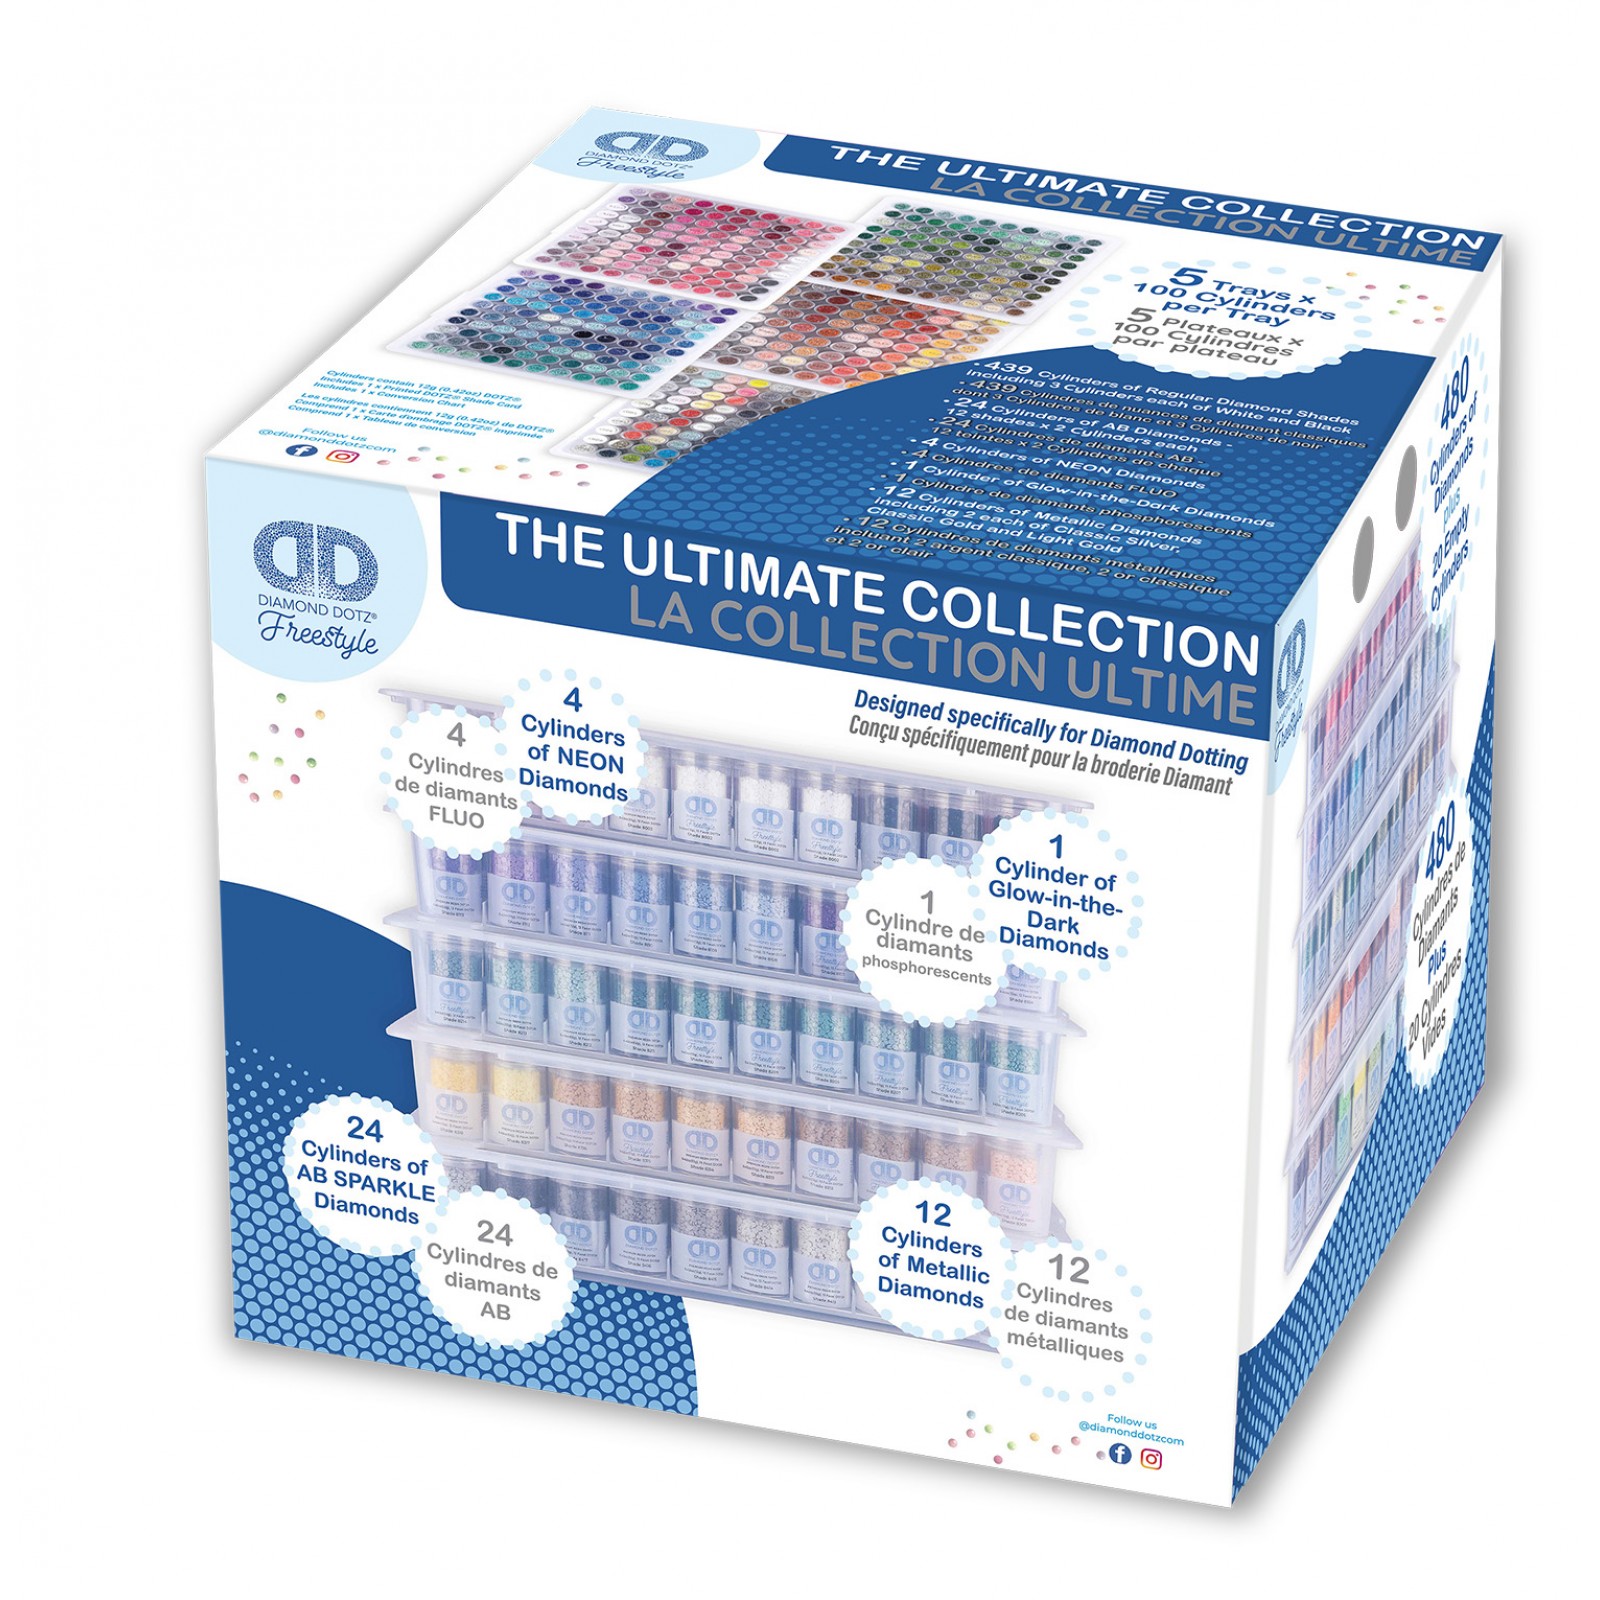 The Ultimate Collection - 461 Diamond Shades Collection - Diamond Painting  Accessories - DDA.101 - Diamond Dotz®